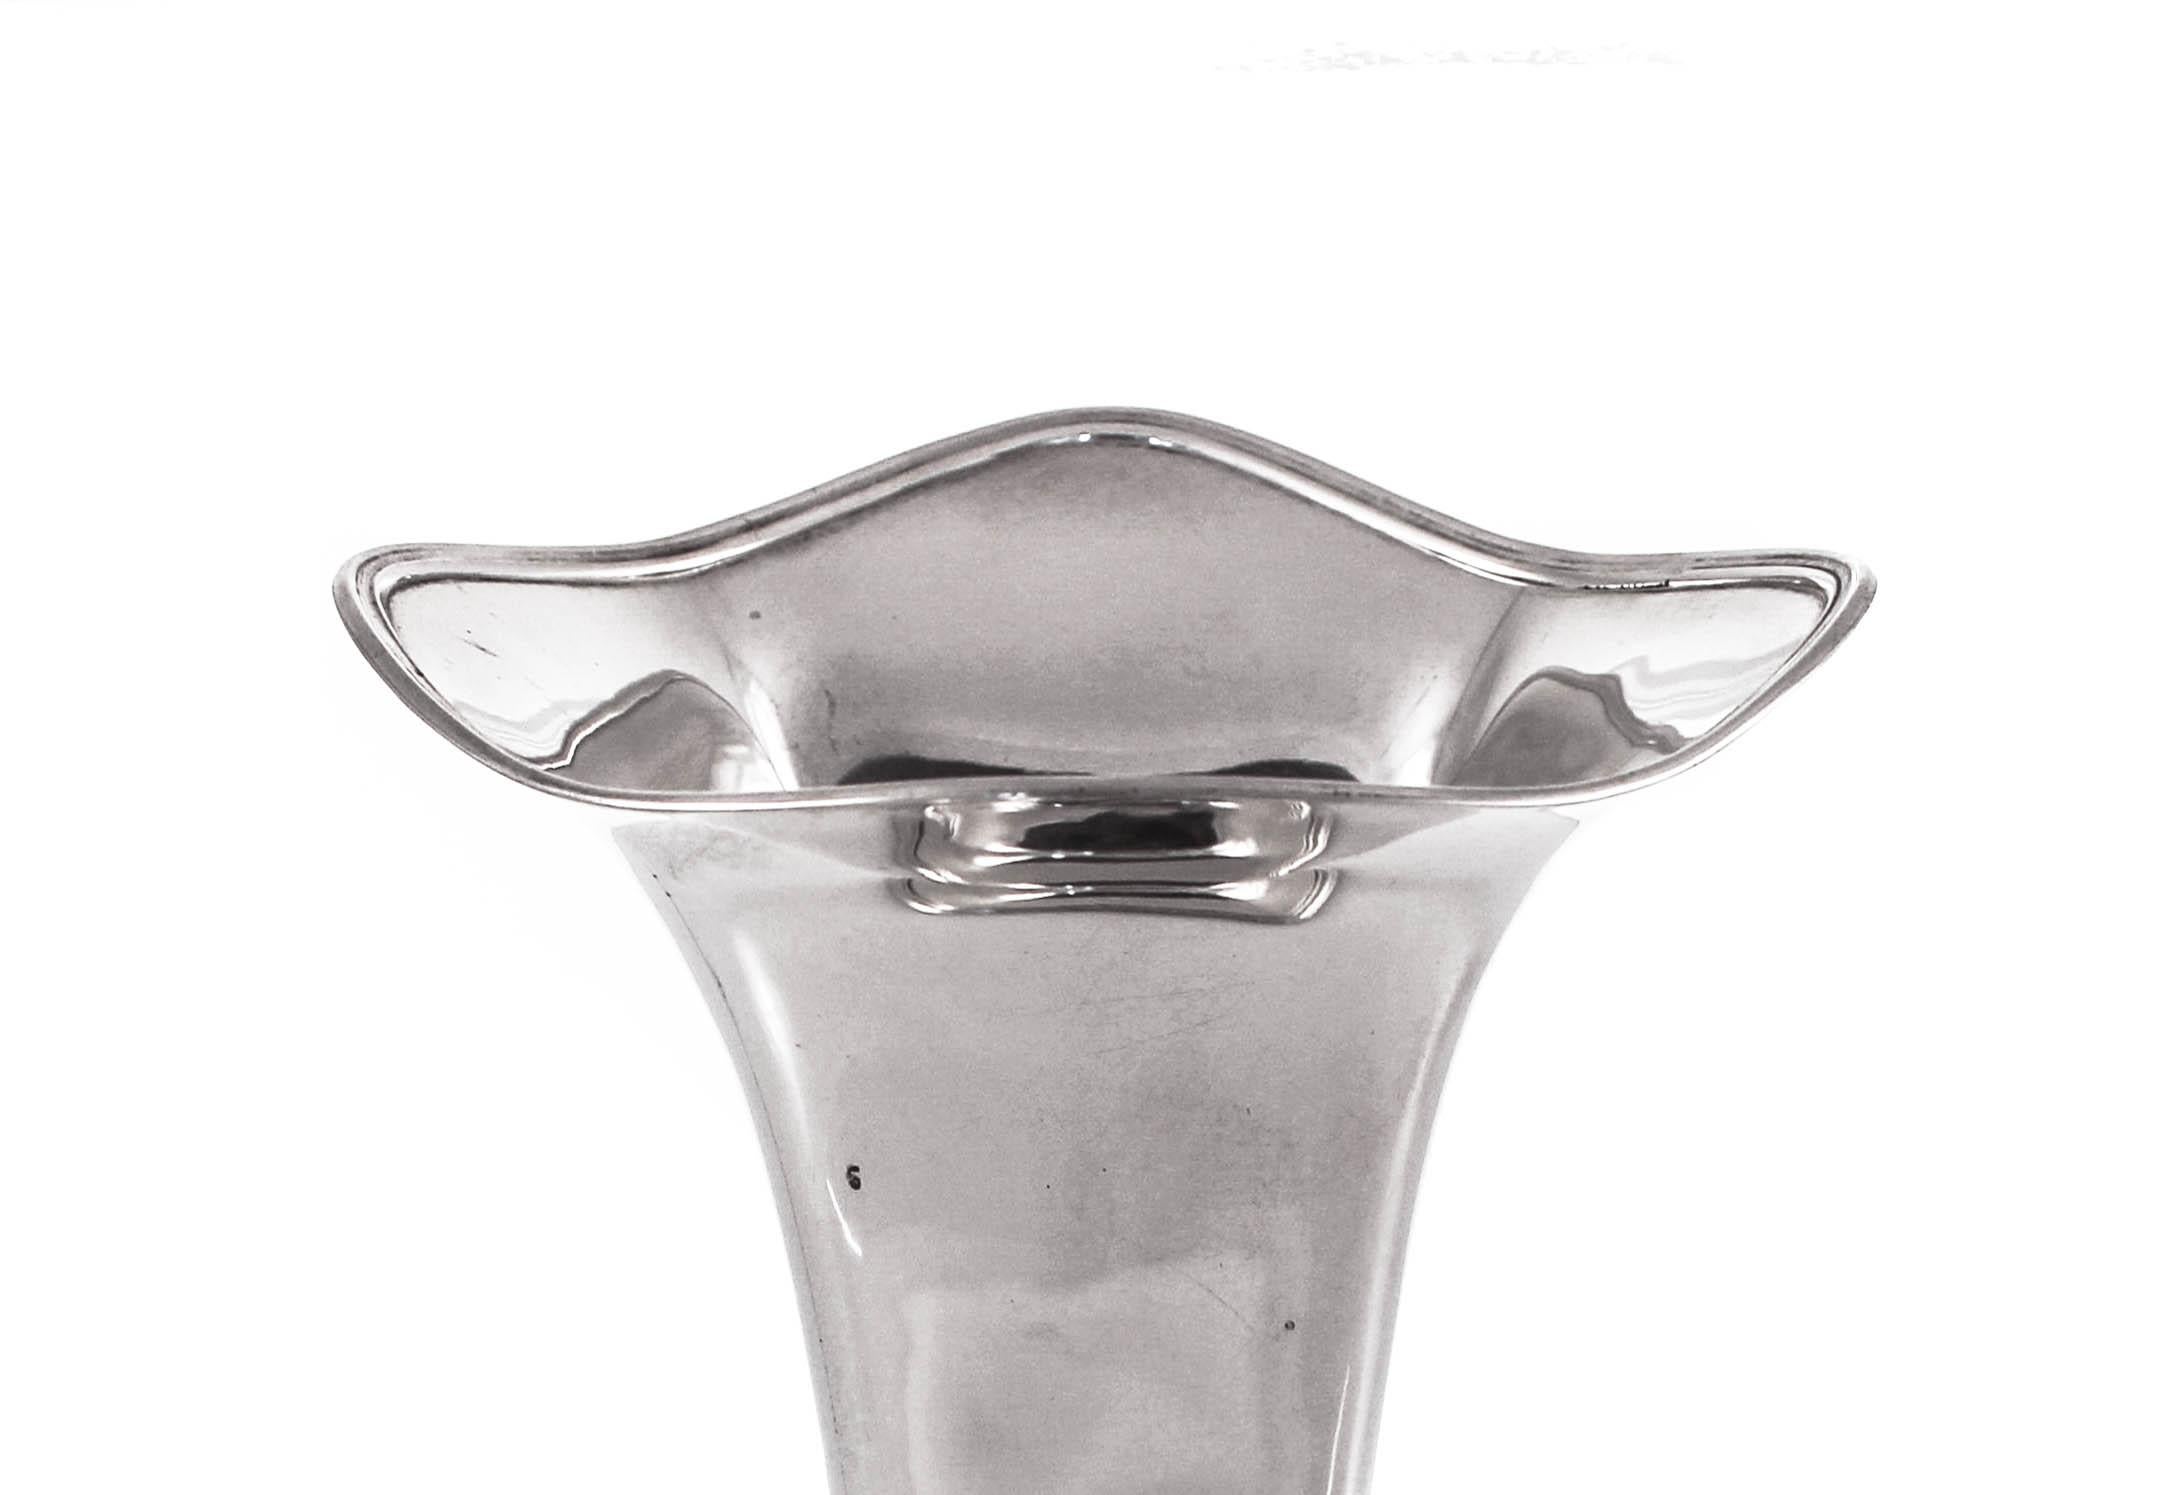 Handsome, modern and tailored are just some of the adjectives one can use in describing this sterling silver vase. In keeping with the midcentury theme of less is more, this piece has no etchings or designs. It has a square shaped base and is